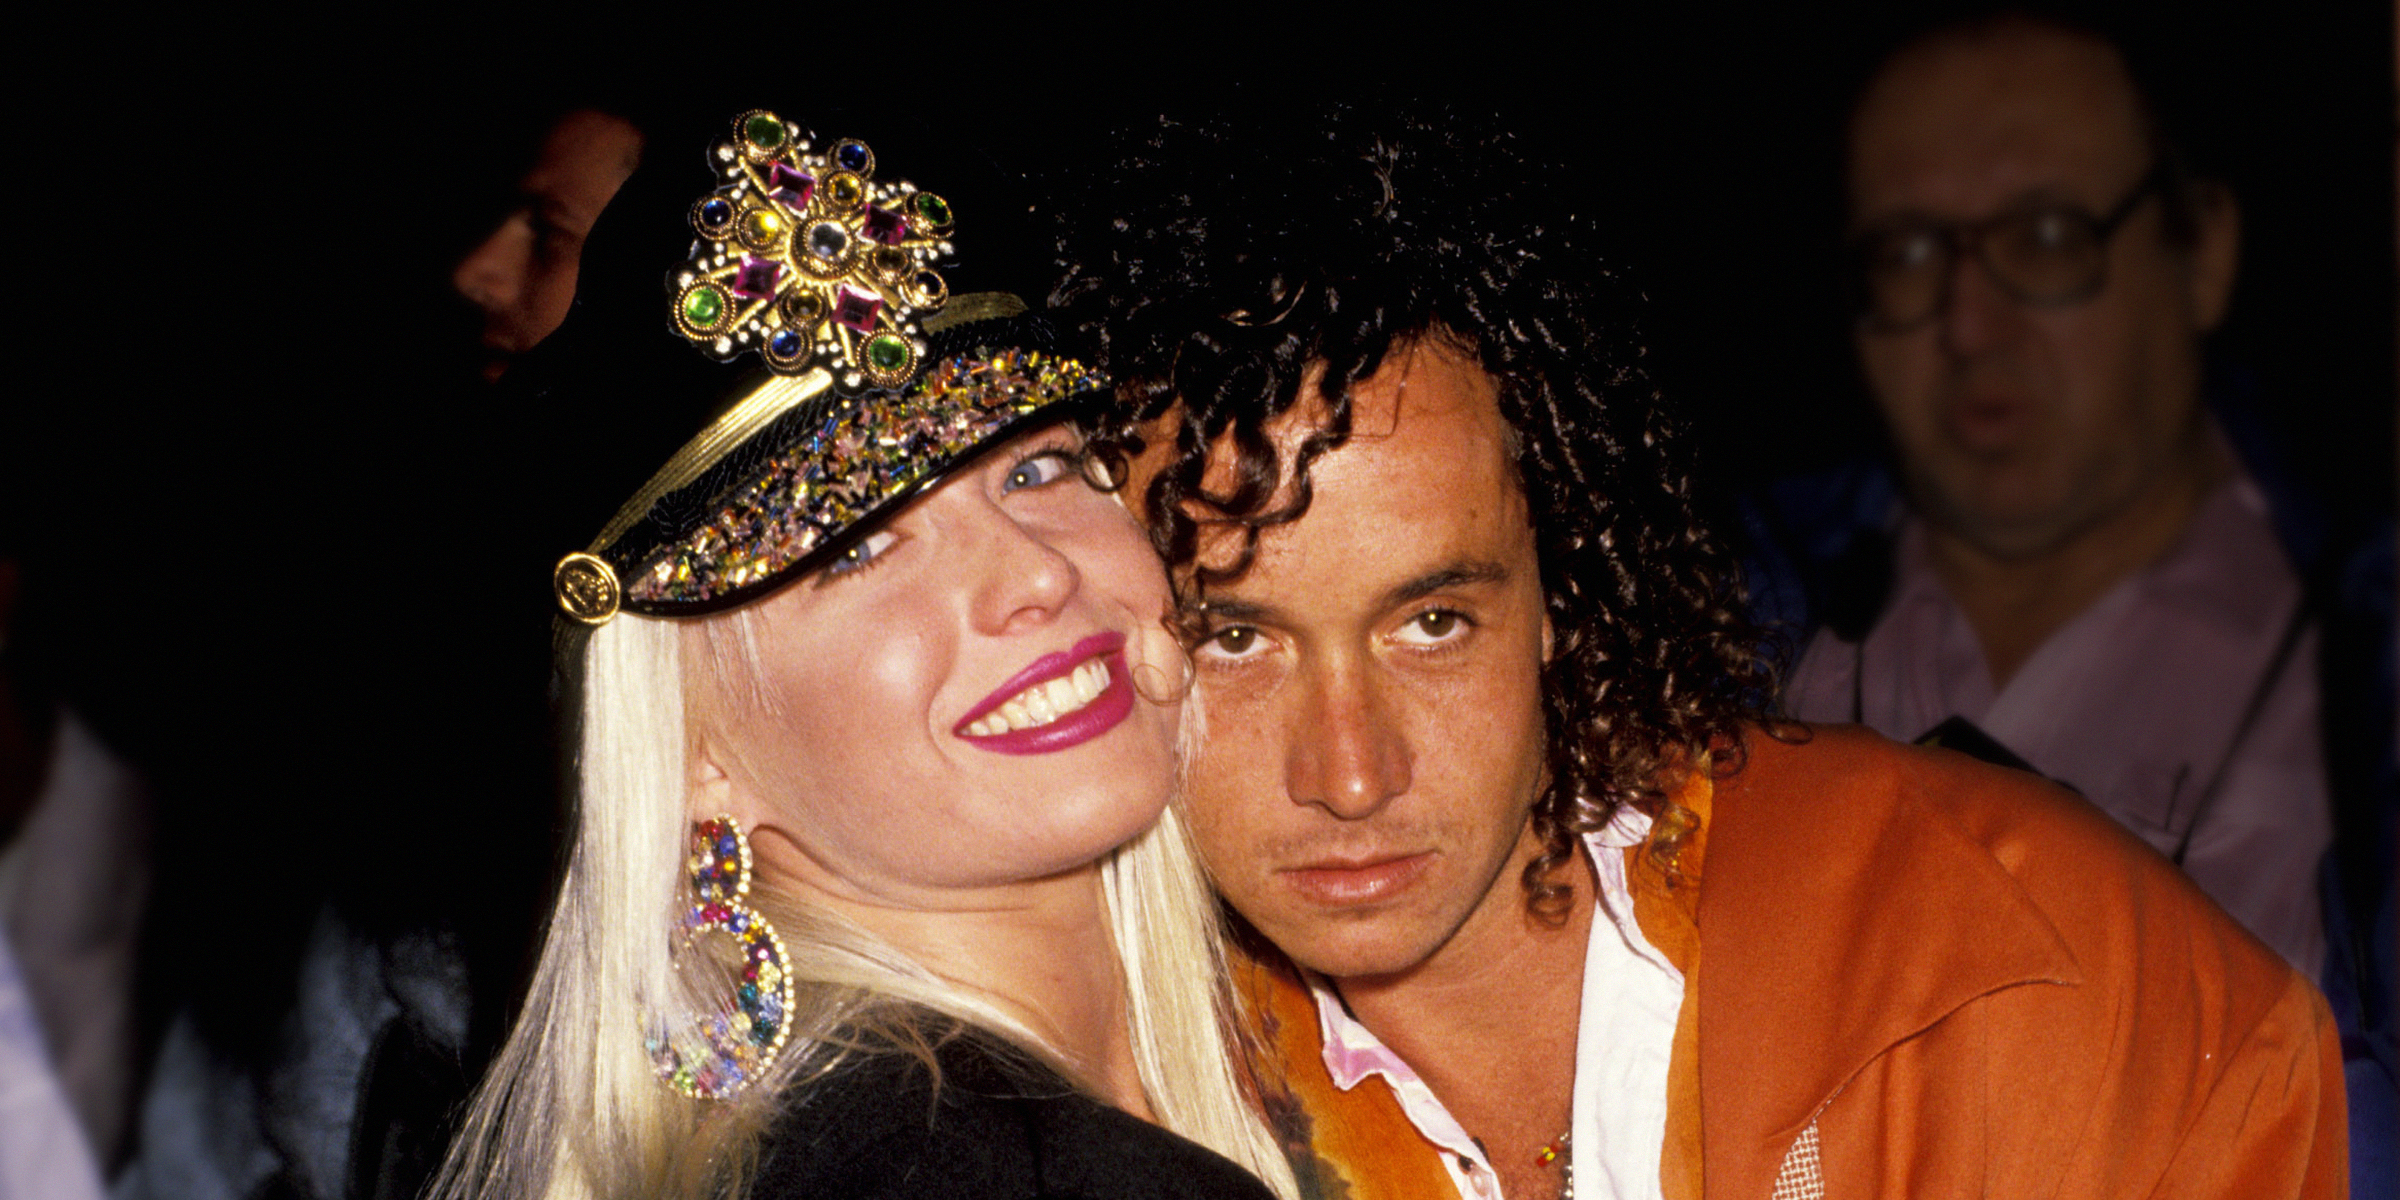 Shannon "Savannah" Wilsey and Pauly Shore | Source: Getty Images